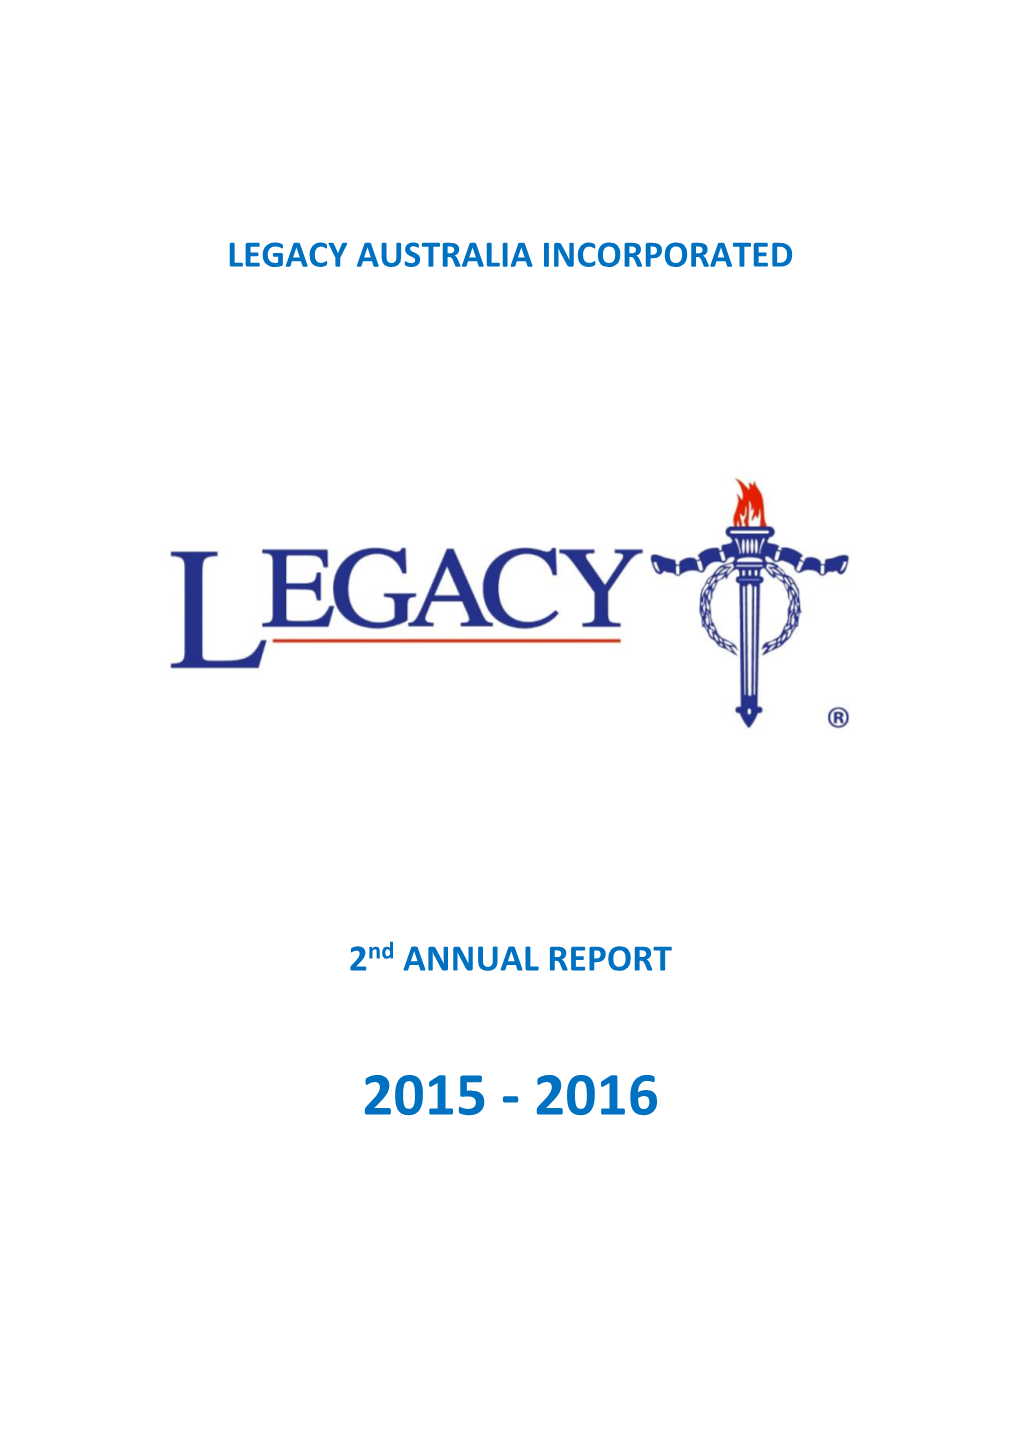 LEGACY AUSTRALIA INCORPORATED 2Nd ANNUAL